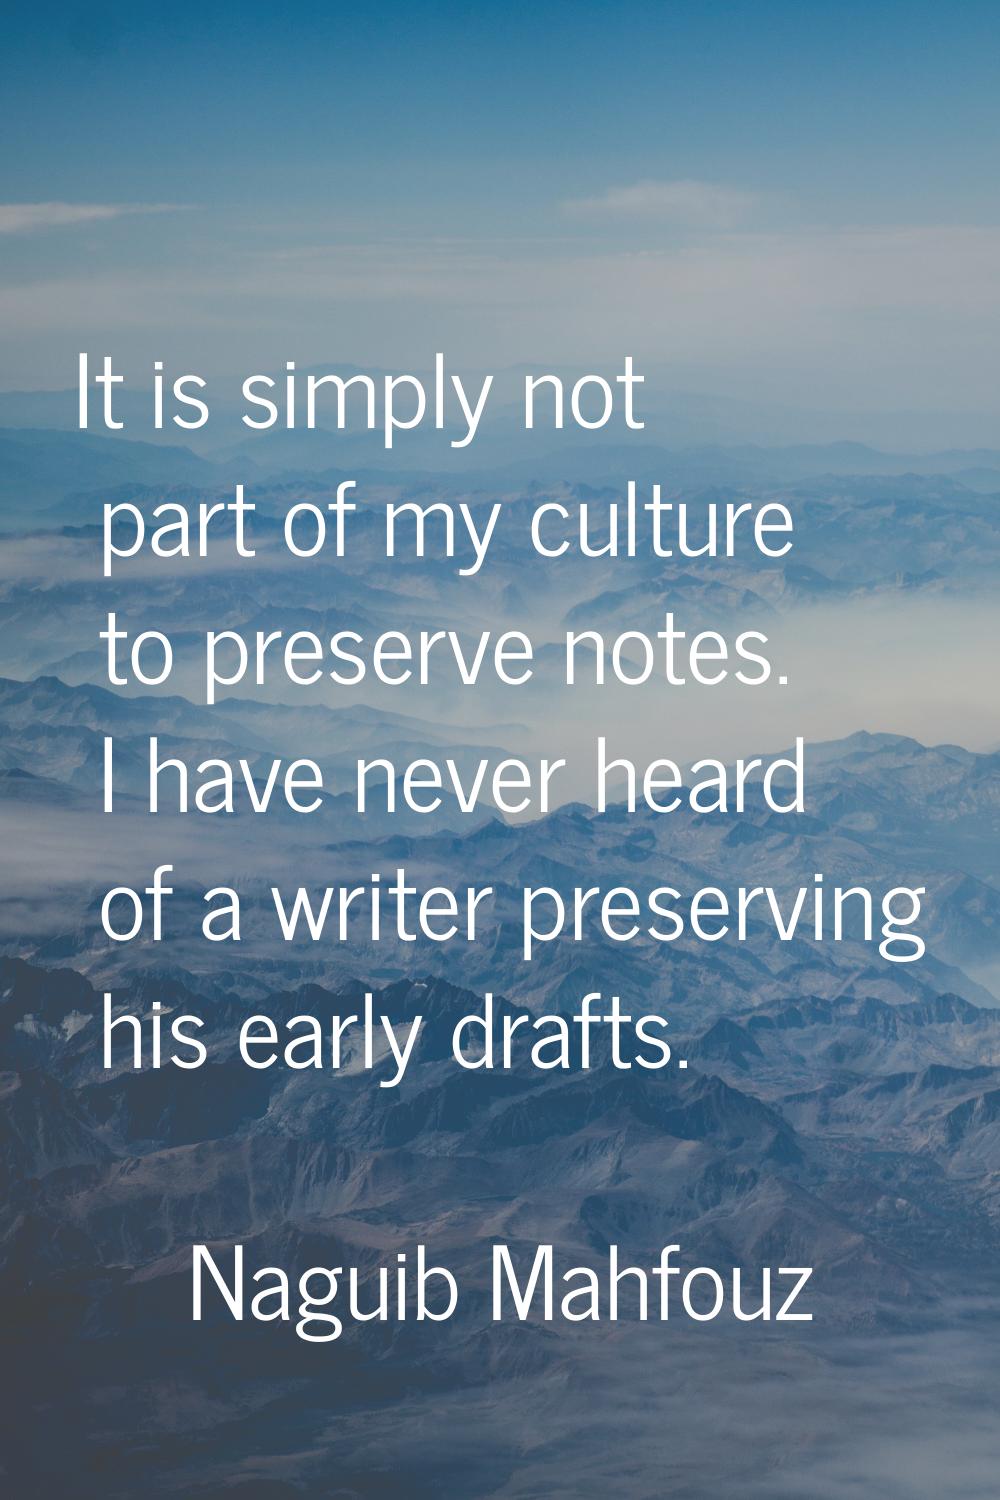 It is simply not part of my culture to preserve notes. I have never heard of a writer preserving hi